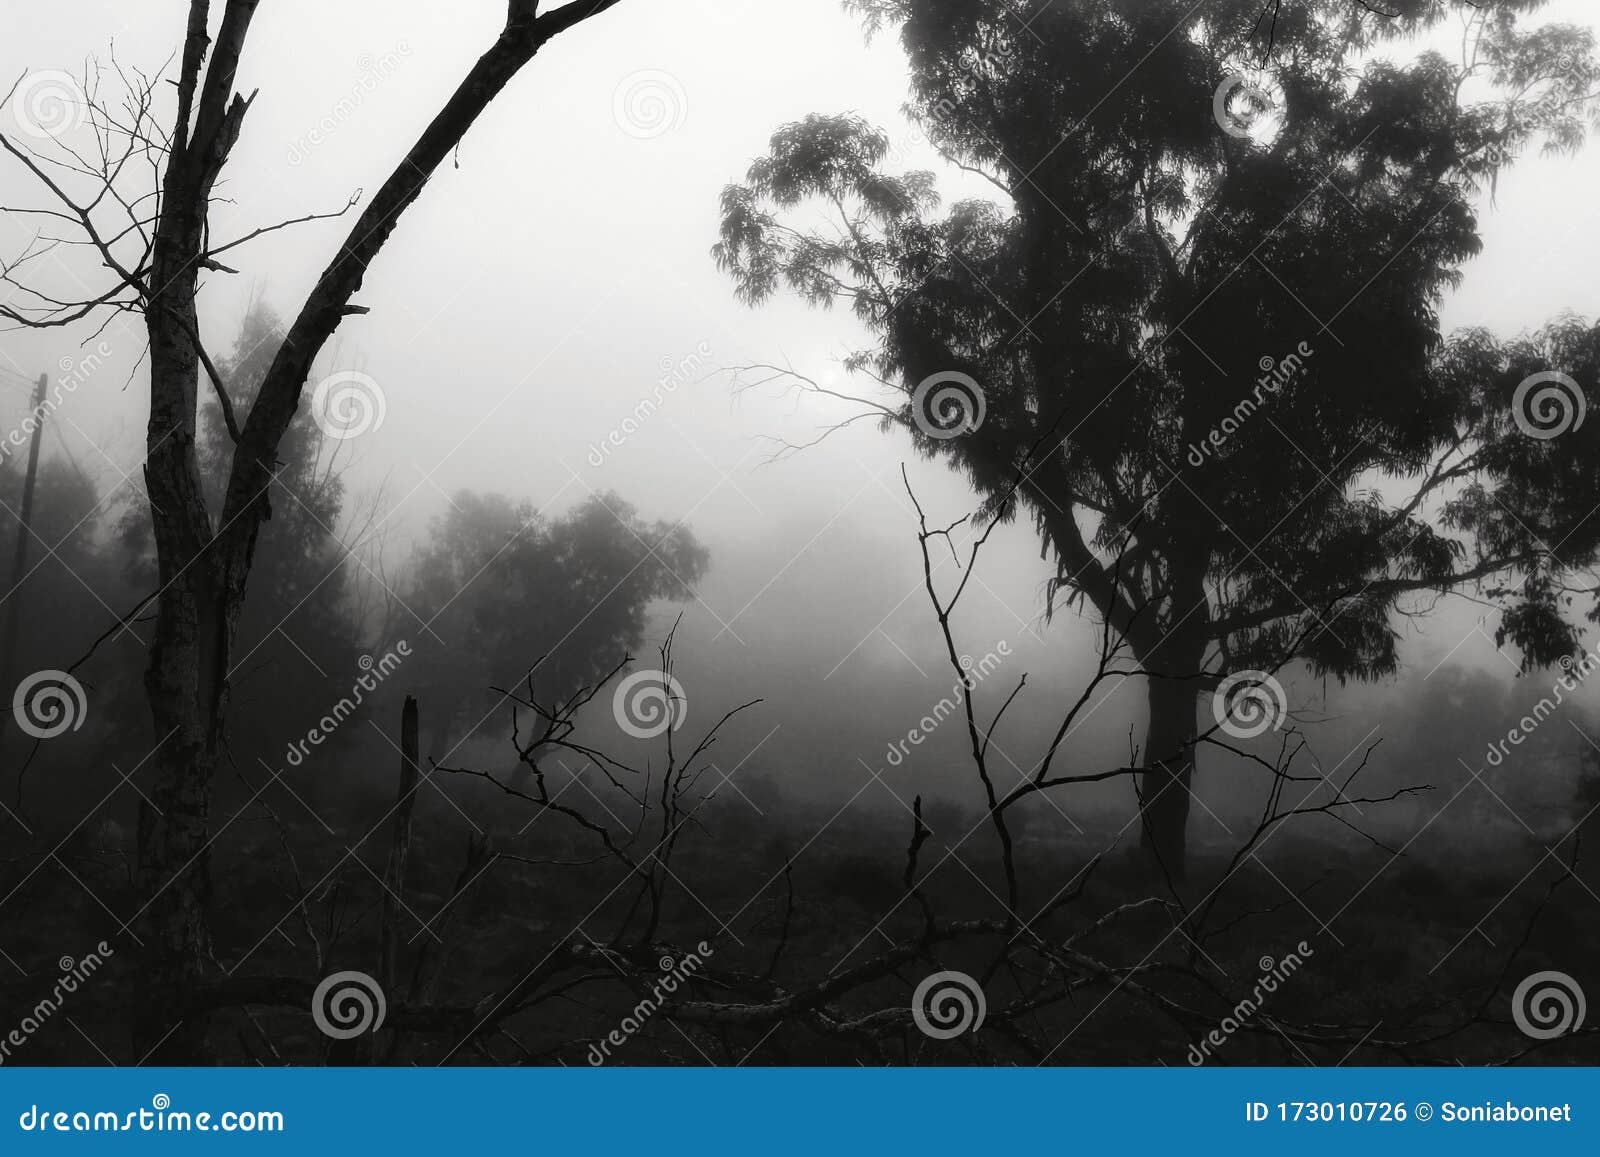 eucalyptus forest covered by fog in the morning